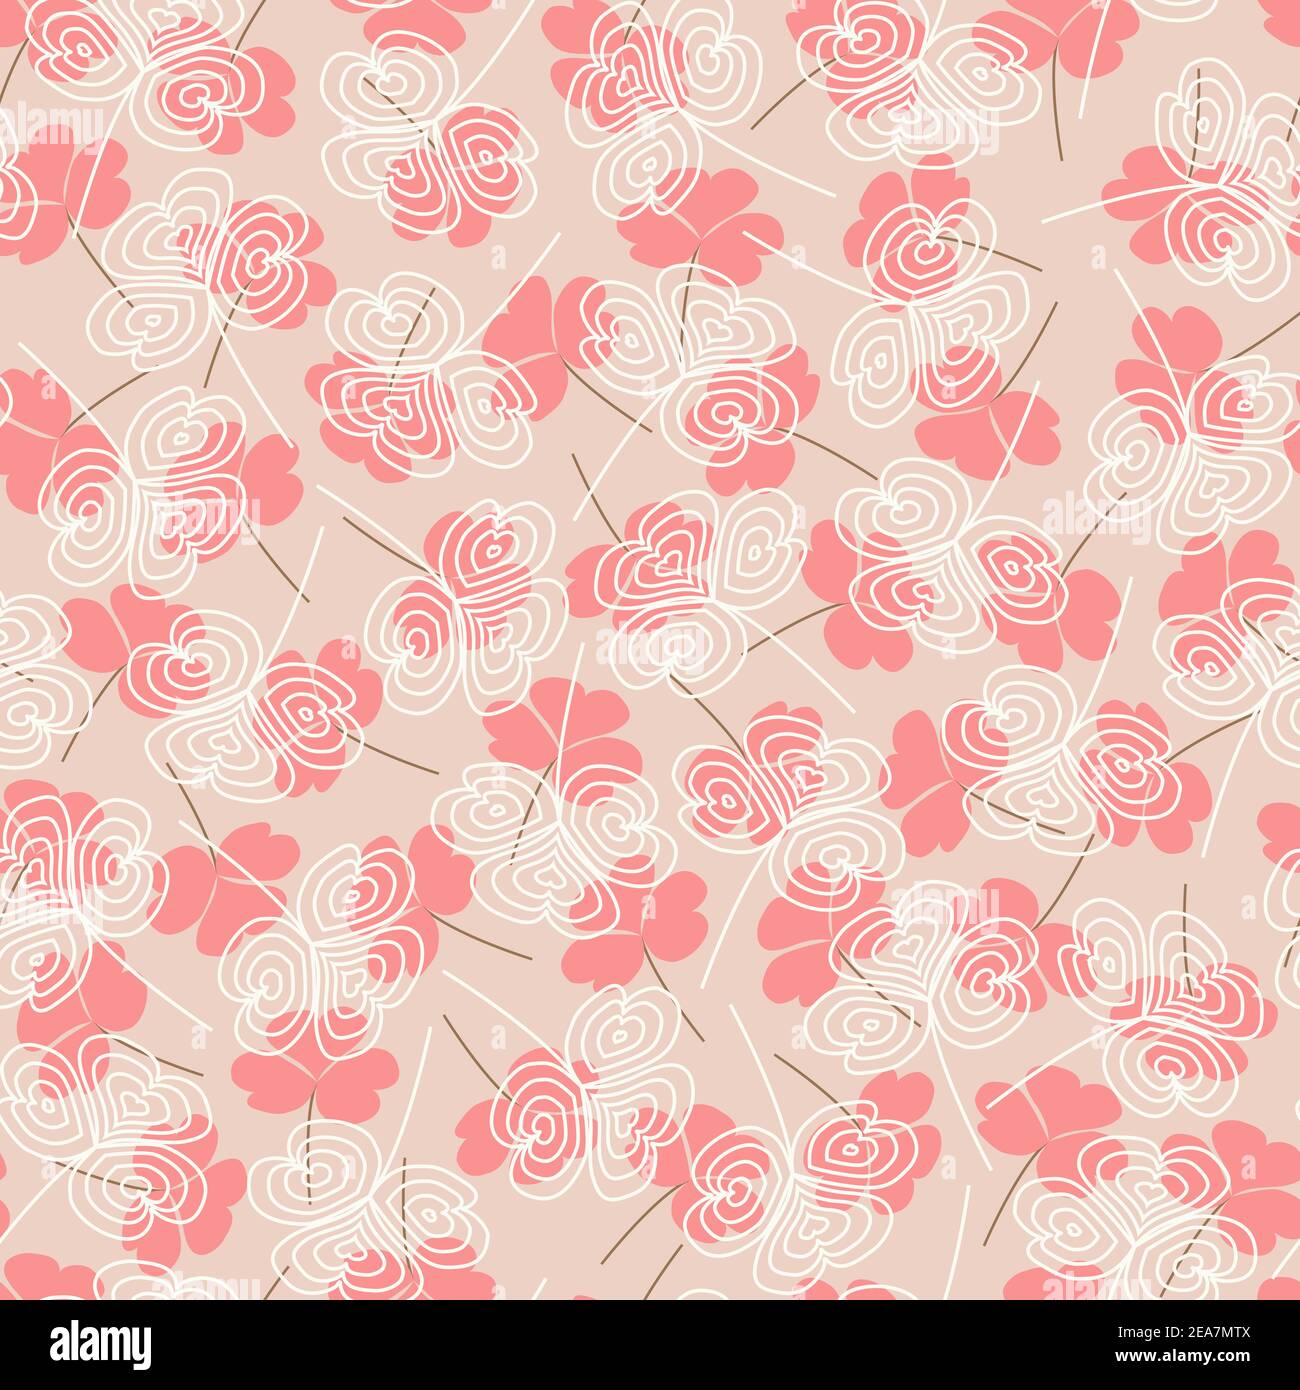 Elegant trendy ditsy floral vector seamless pattern design of water clover leaves. Repeating texture foliate background for printing and textile Stock Vector